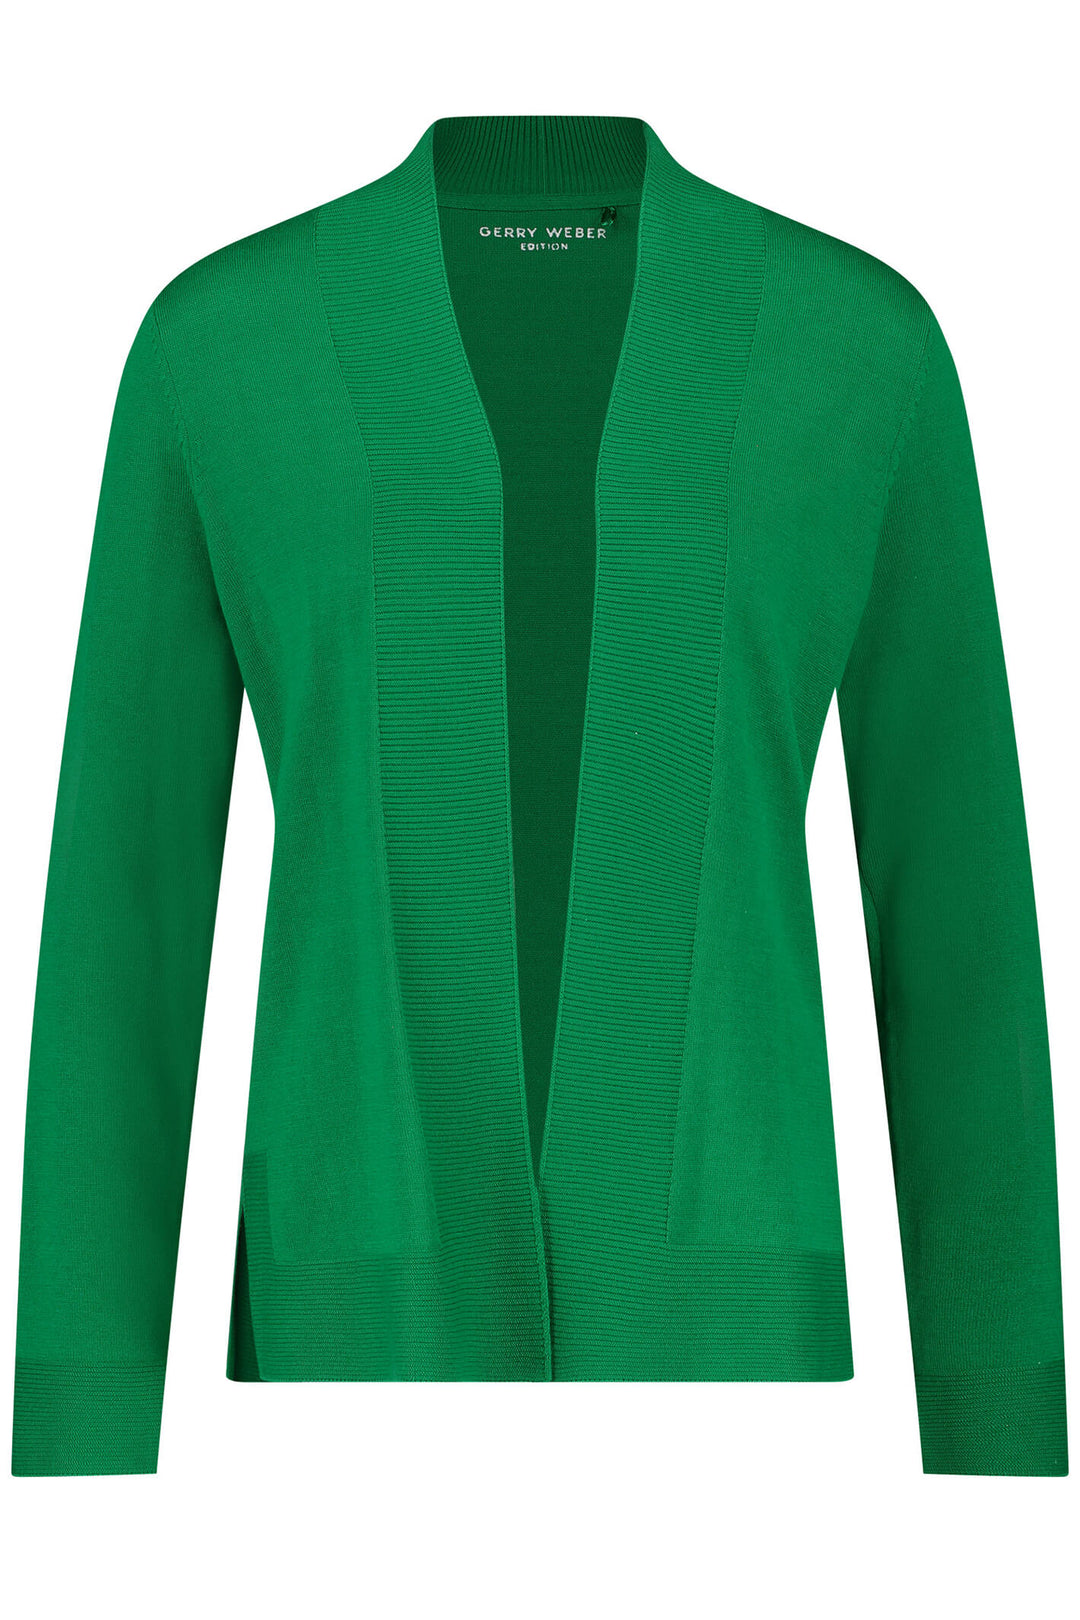 Gerry Weber 935013 Green Knitted Cardigan - Experience Boutique